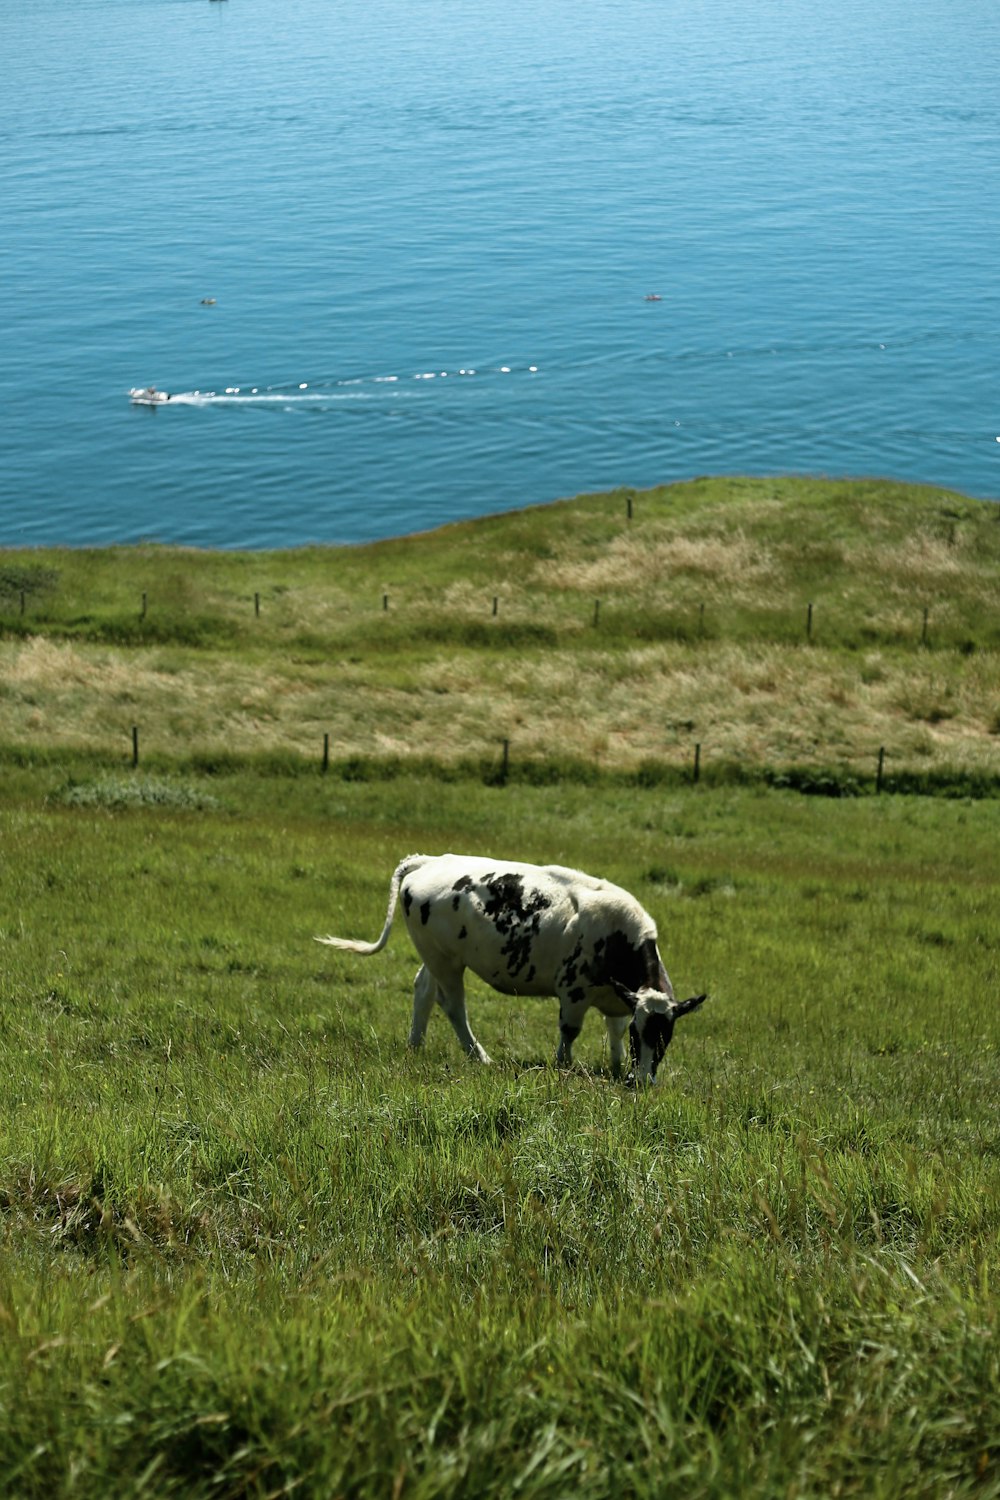 white and black cow on green grass field near body of water during daytime